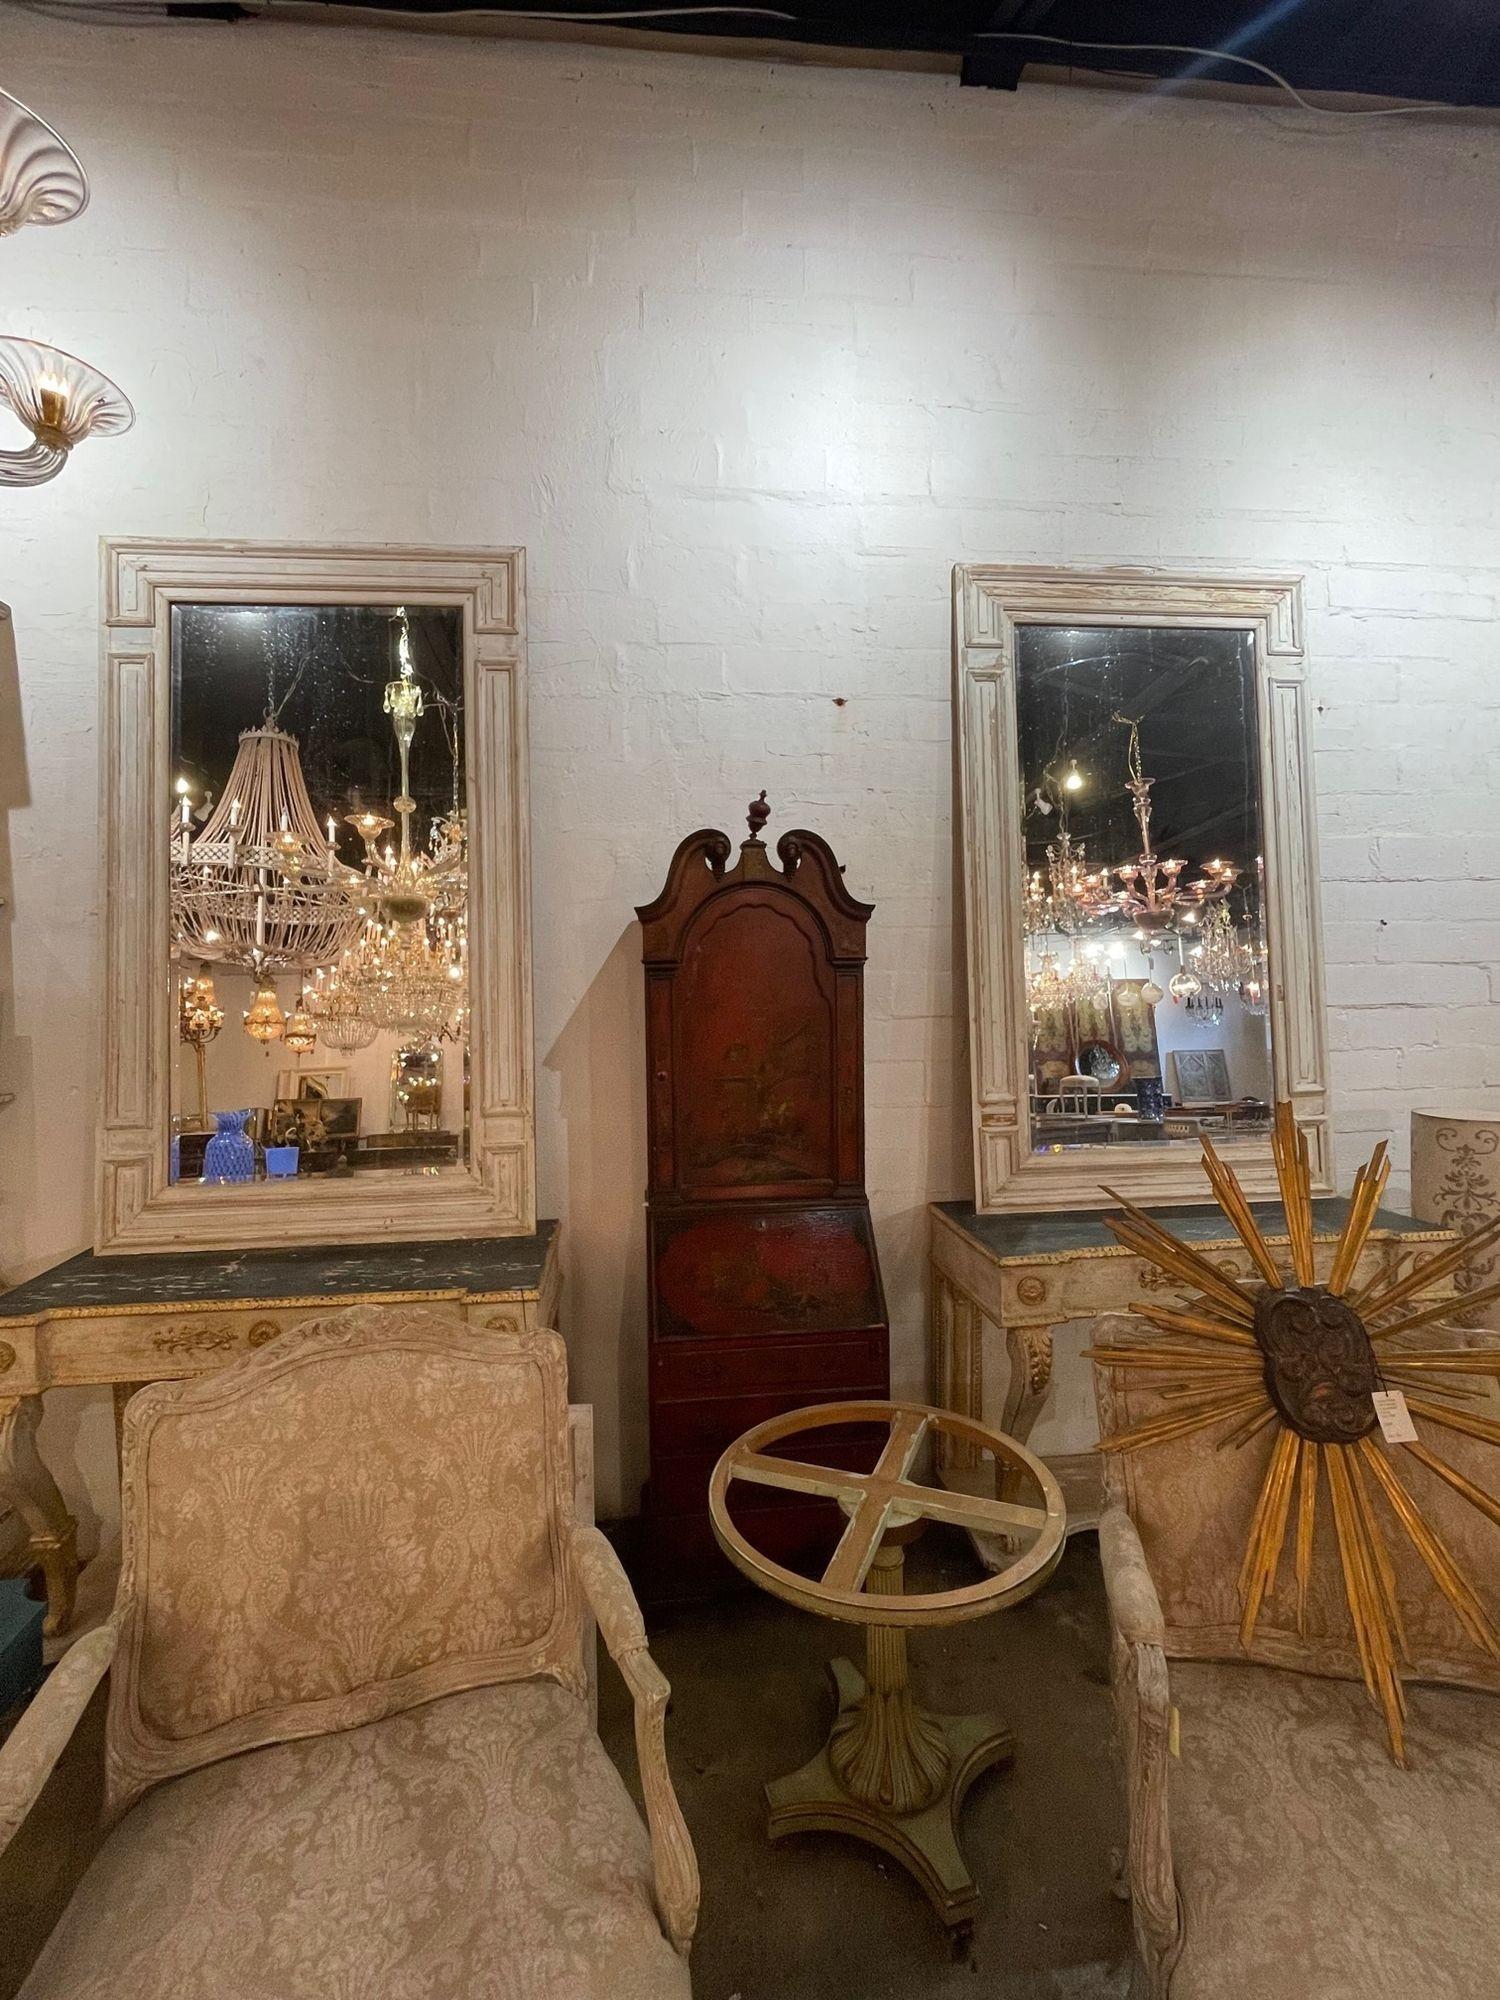 Gorgeous antique French gesso washed mirrors made of architectural panels. These have a great patina and would work well with a variety of decors.  Lovely!
Note: Price listed is for 1 mirror